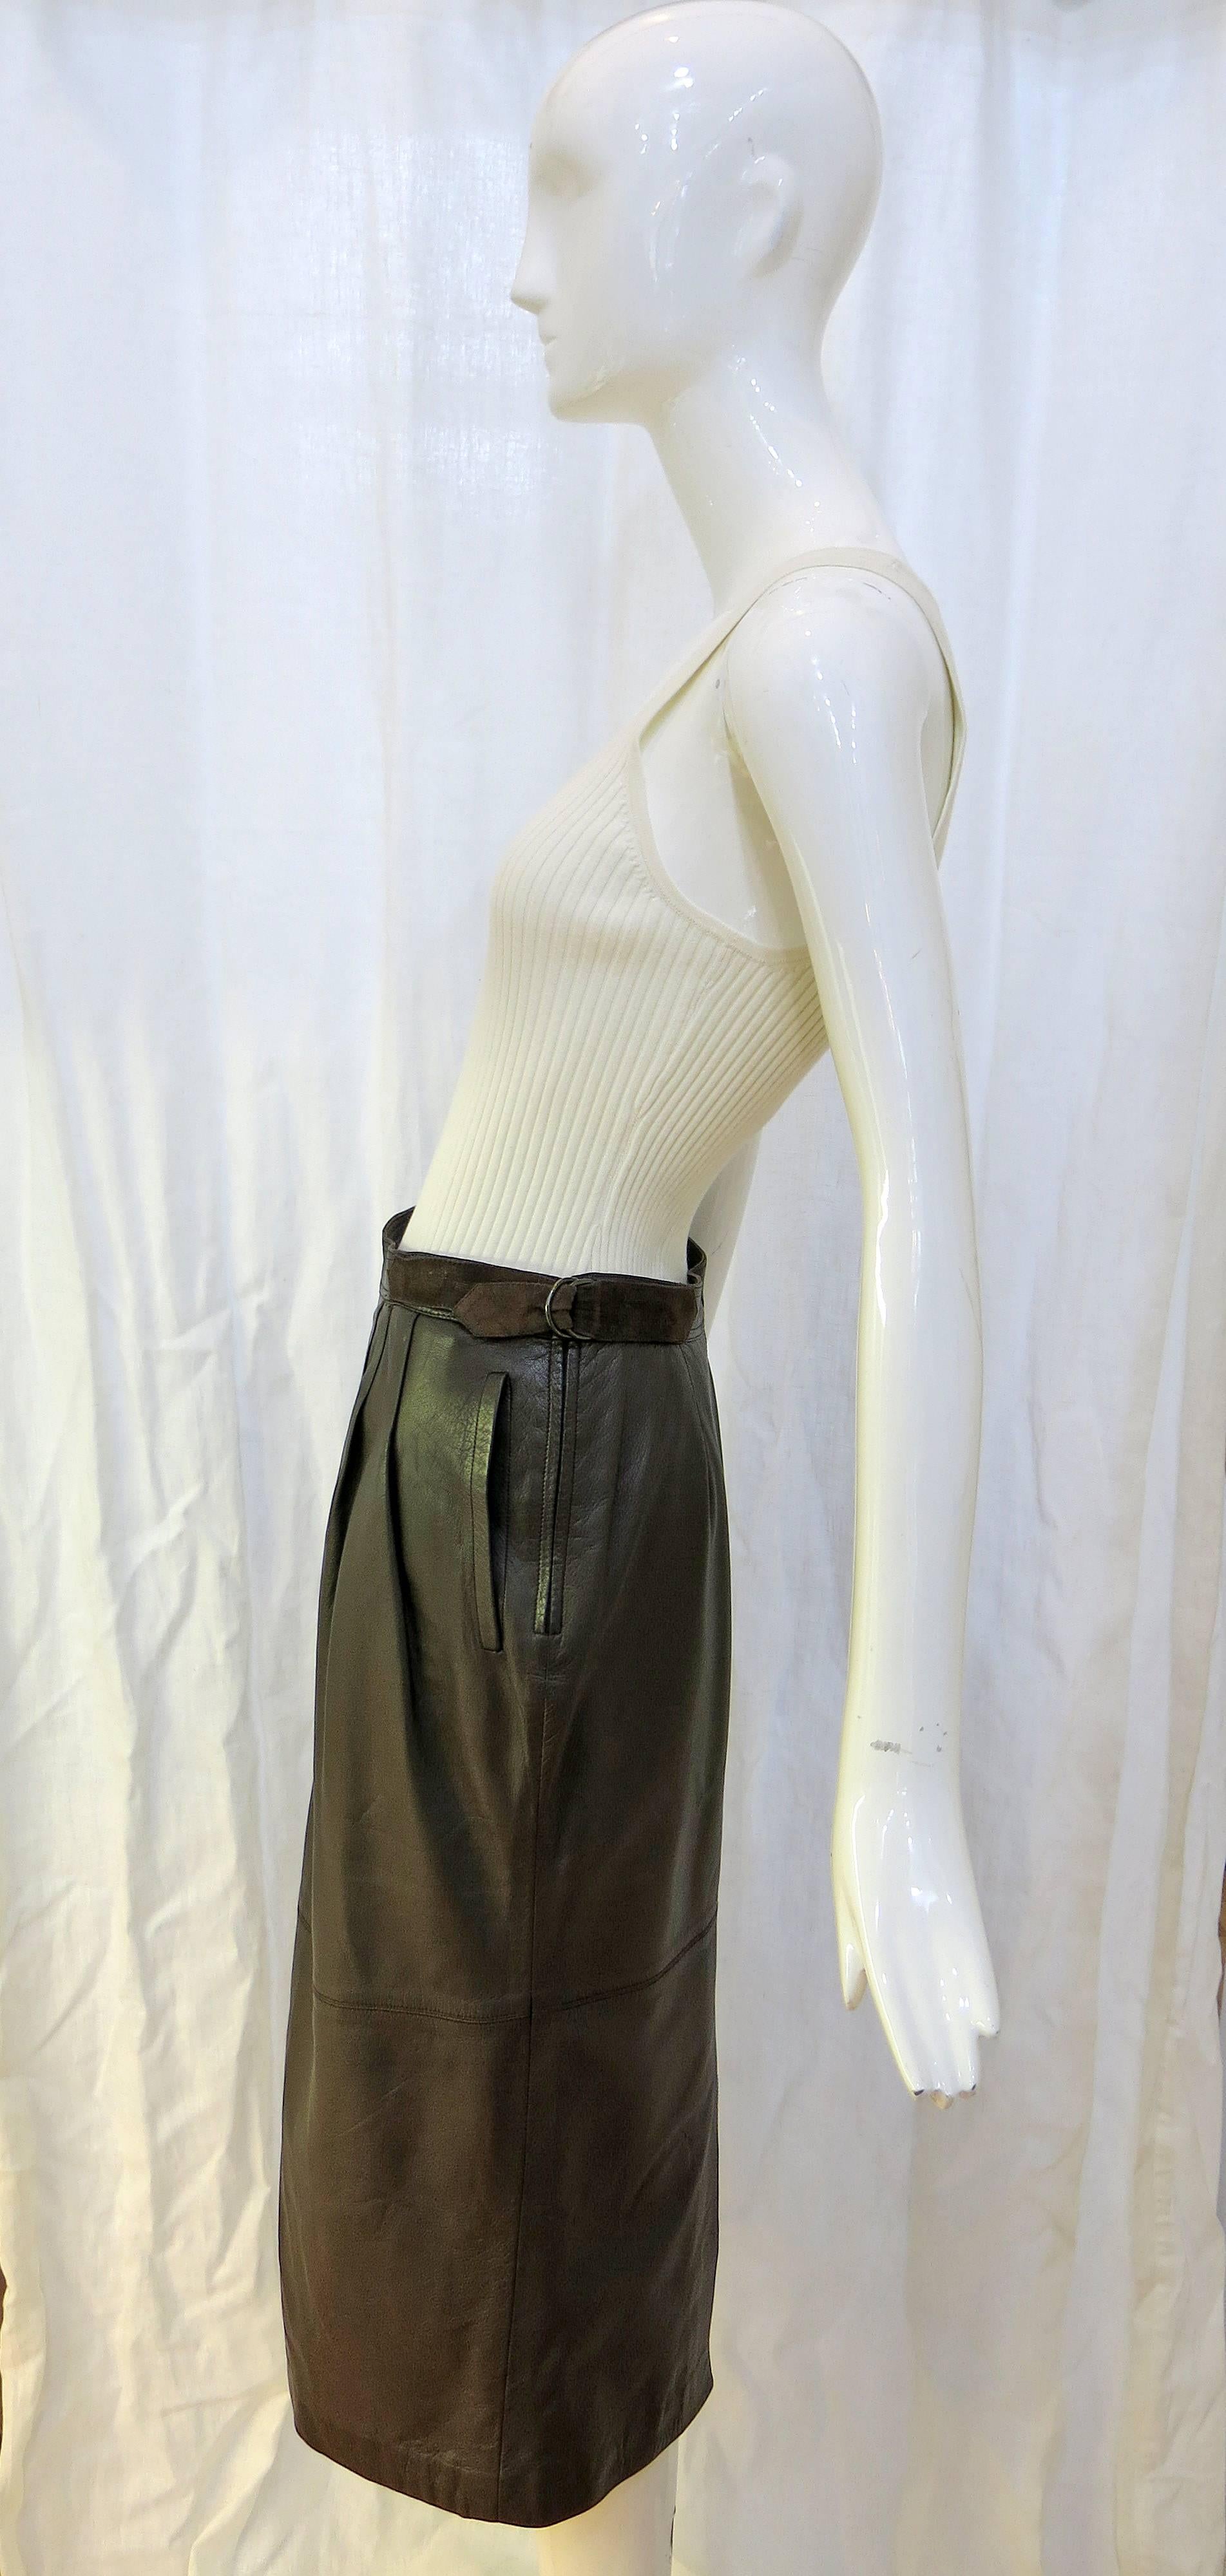 Beautiful, buttery soft brown leather skirt with adjustable waist. The skirt features a tasteful slit up the back, stitching in a cross pattern across the front and back. 

Lined with silk embossed with the Gucci logo as well as two gold toned